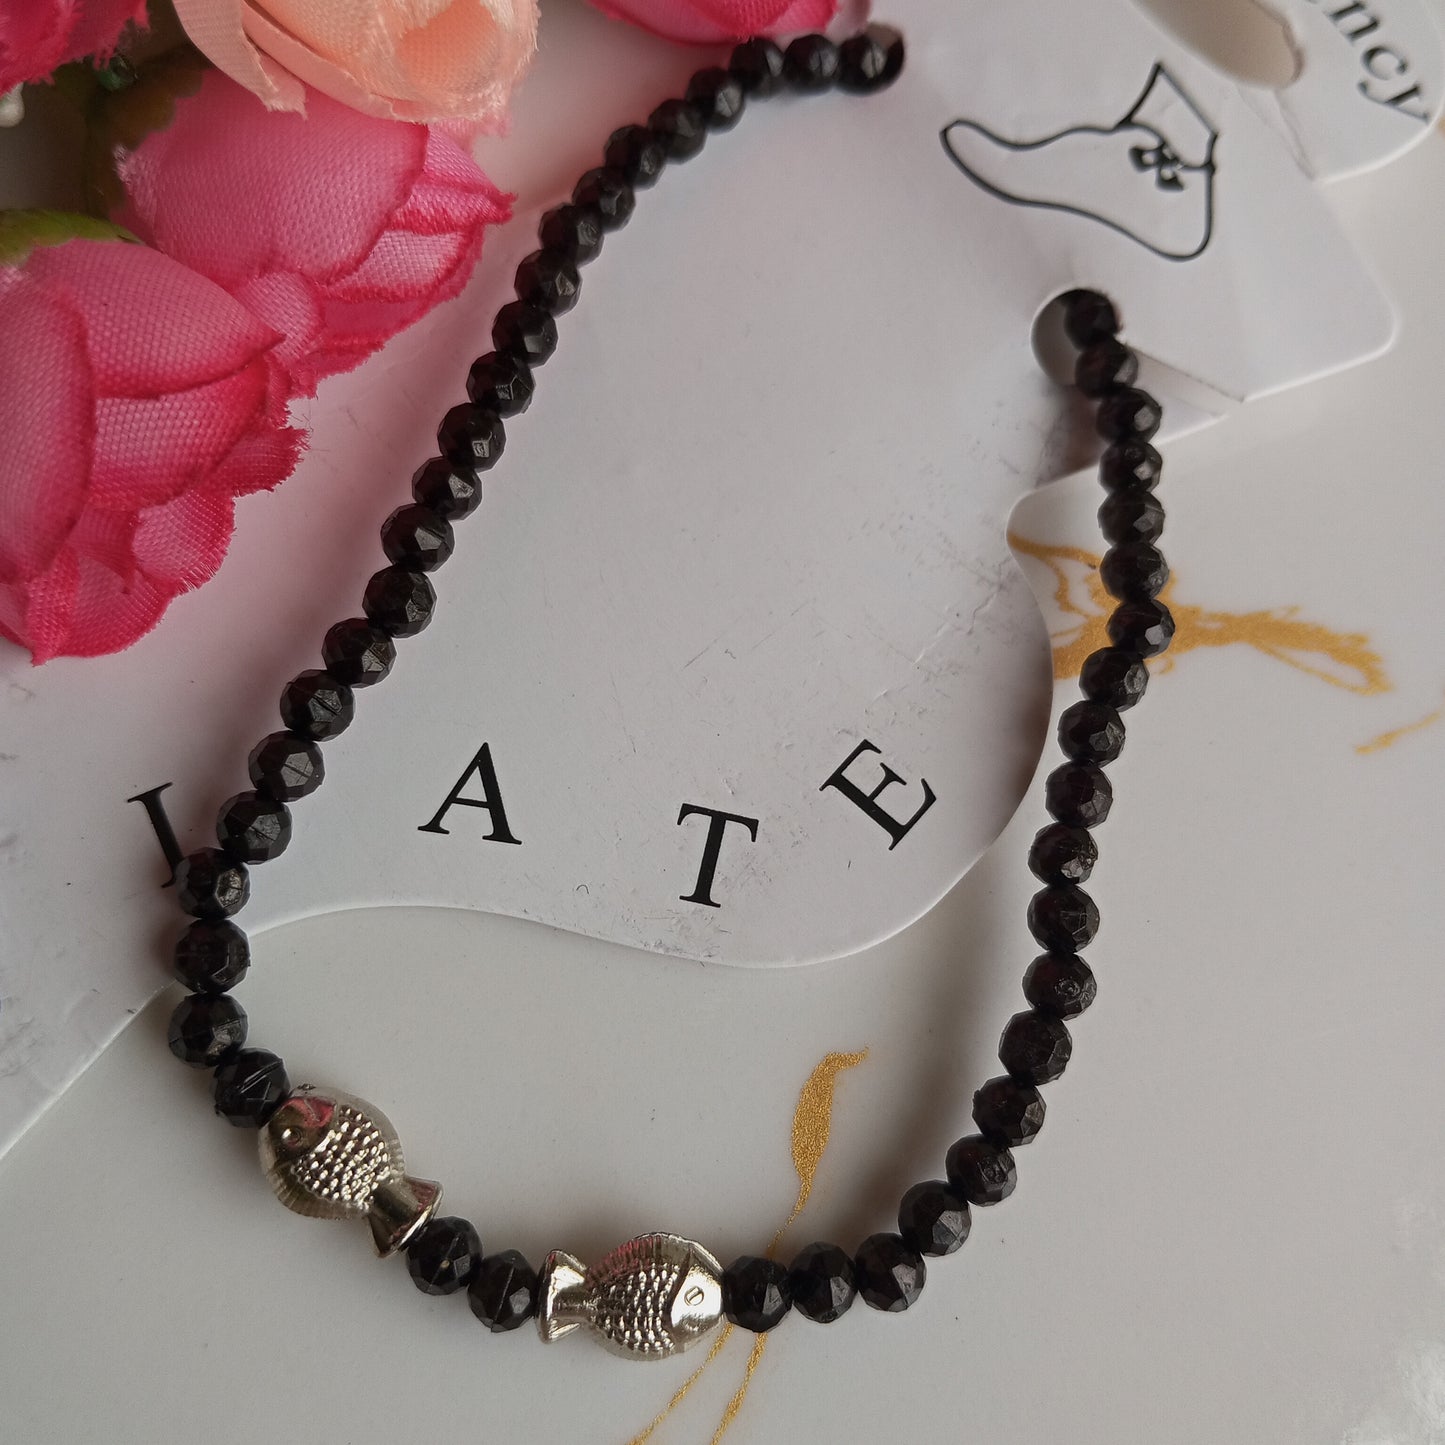 Anklet- Black Beads and Silver Fishes